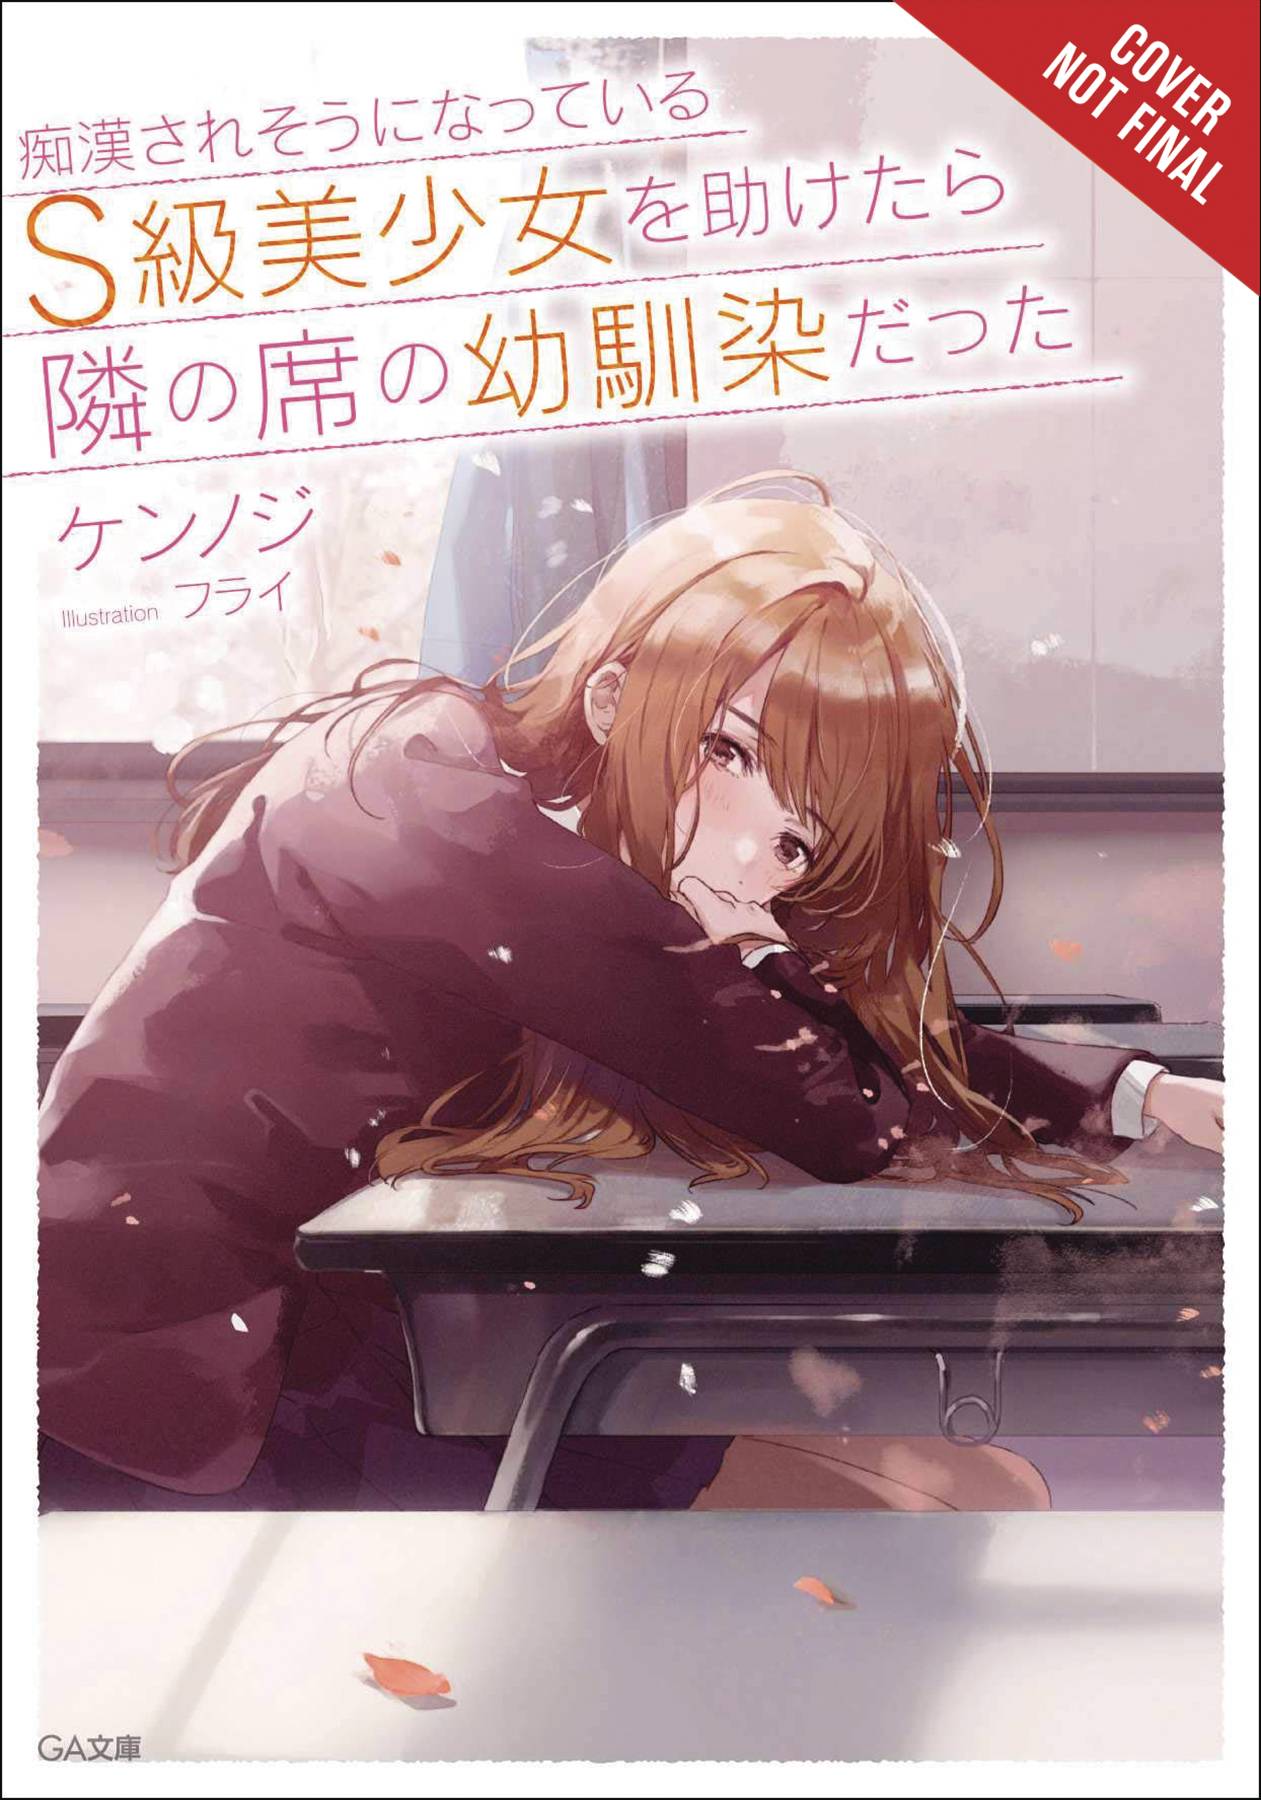 GIRL SAVED ON TRAIN TURNED OUT CHILDHOOD FRIEND LN SC VOL 01